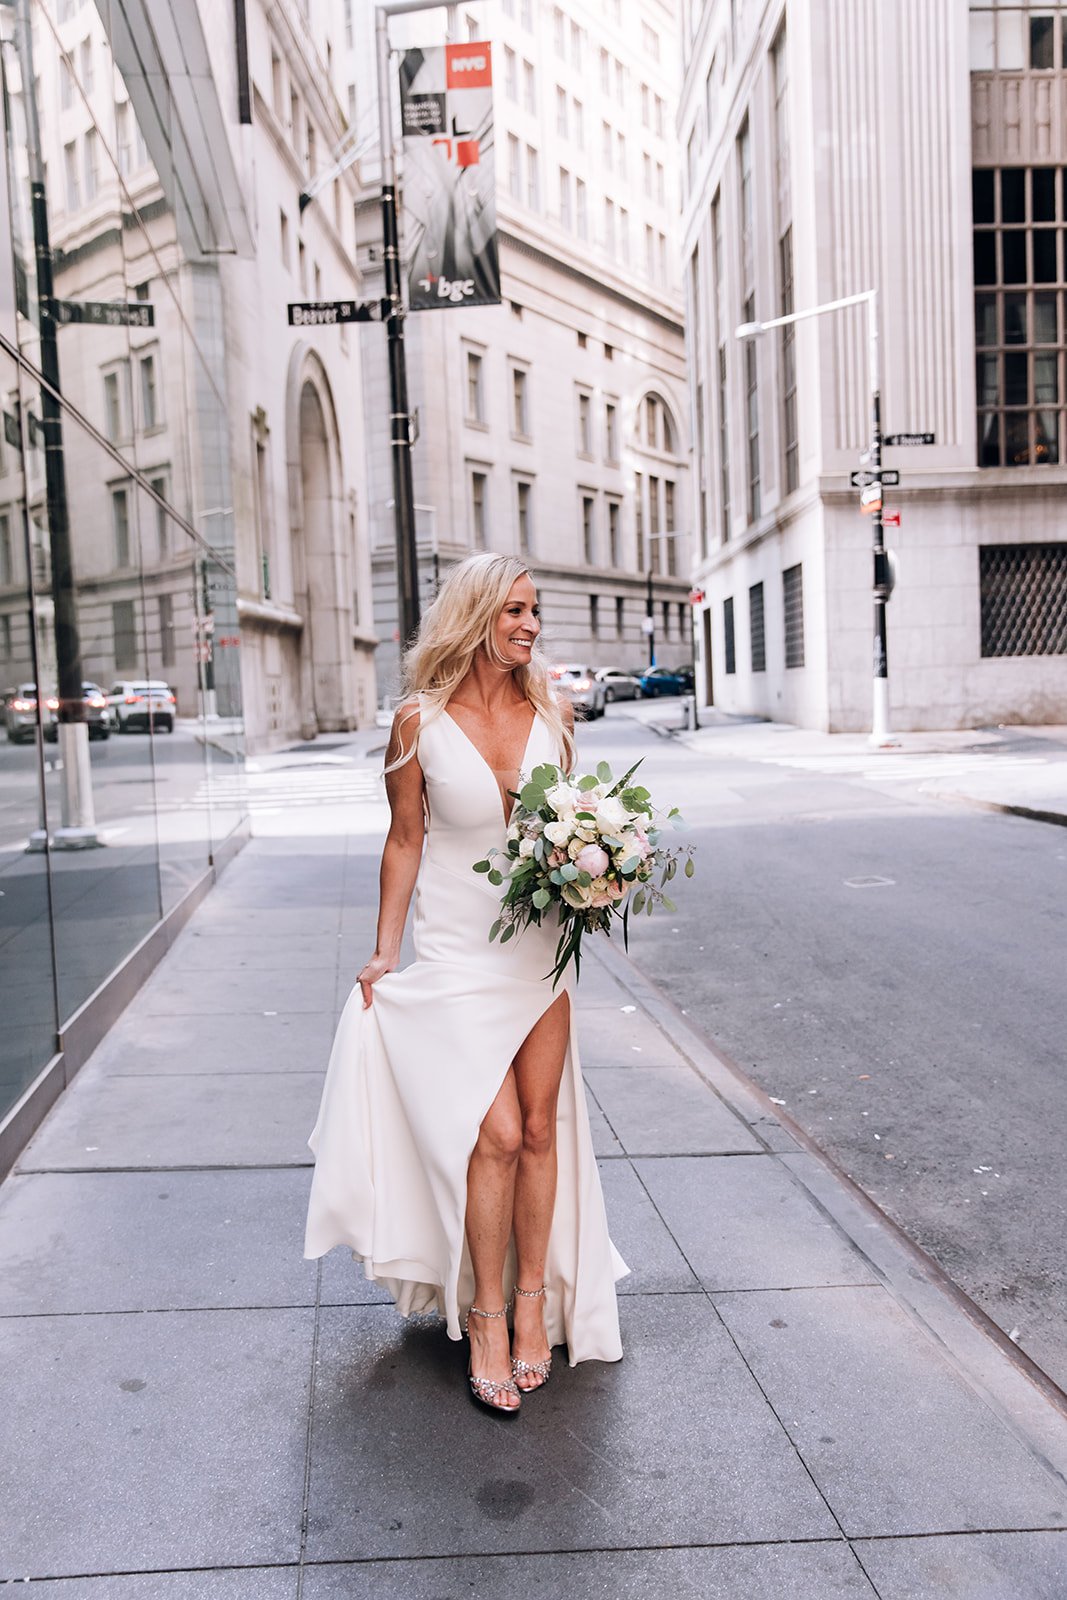 Intimate Wall Street Wedding With An Old New York Reception